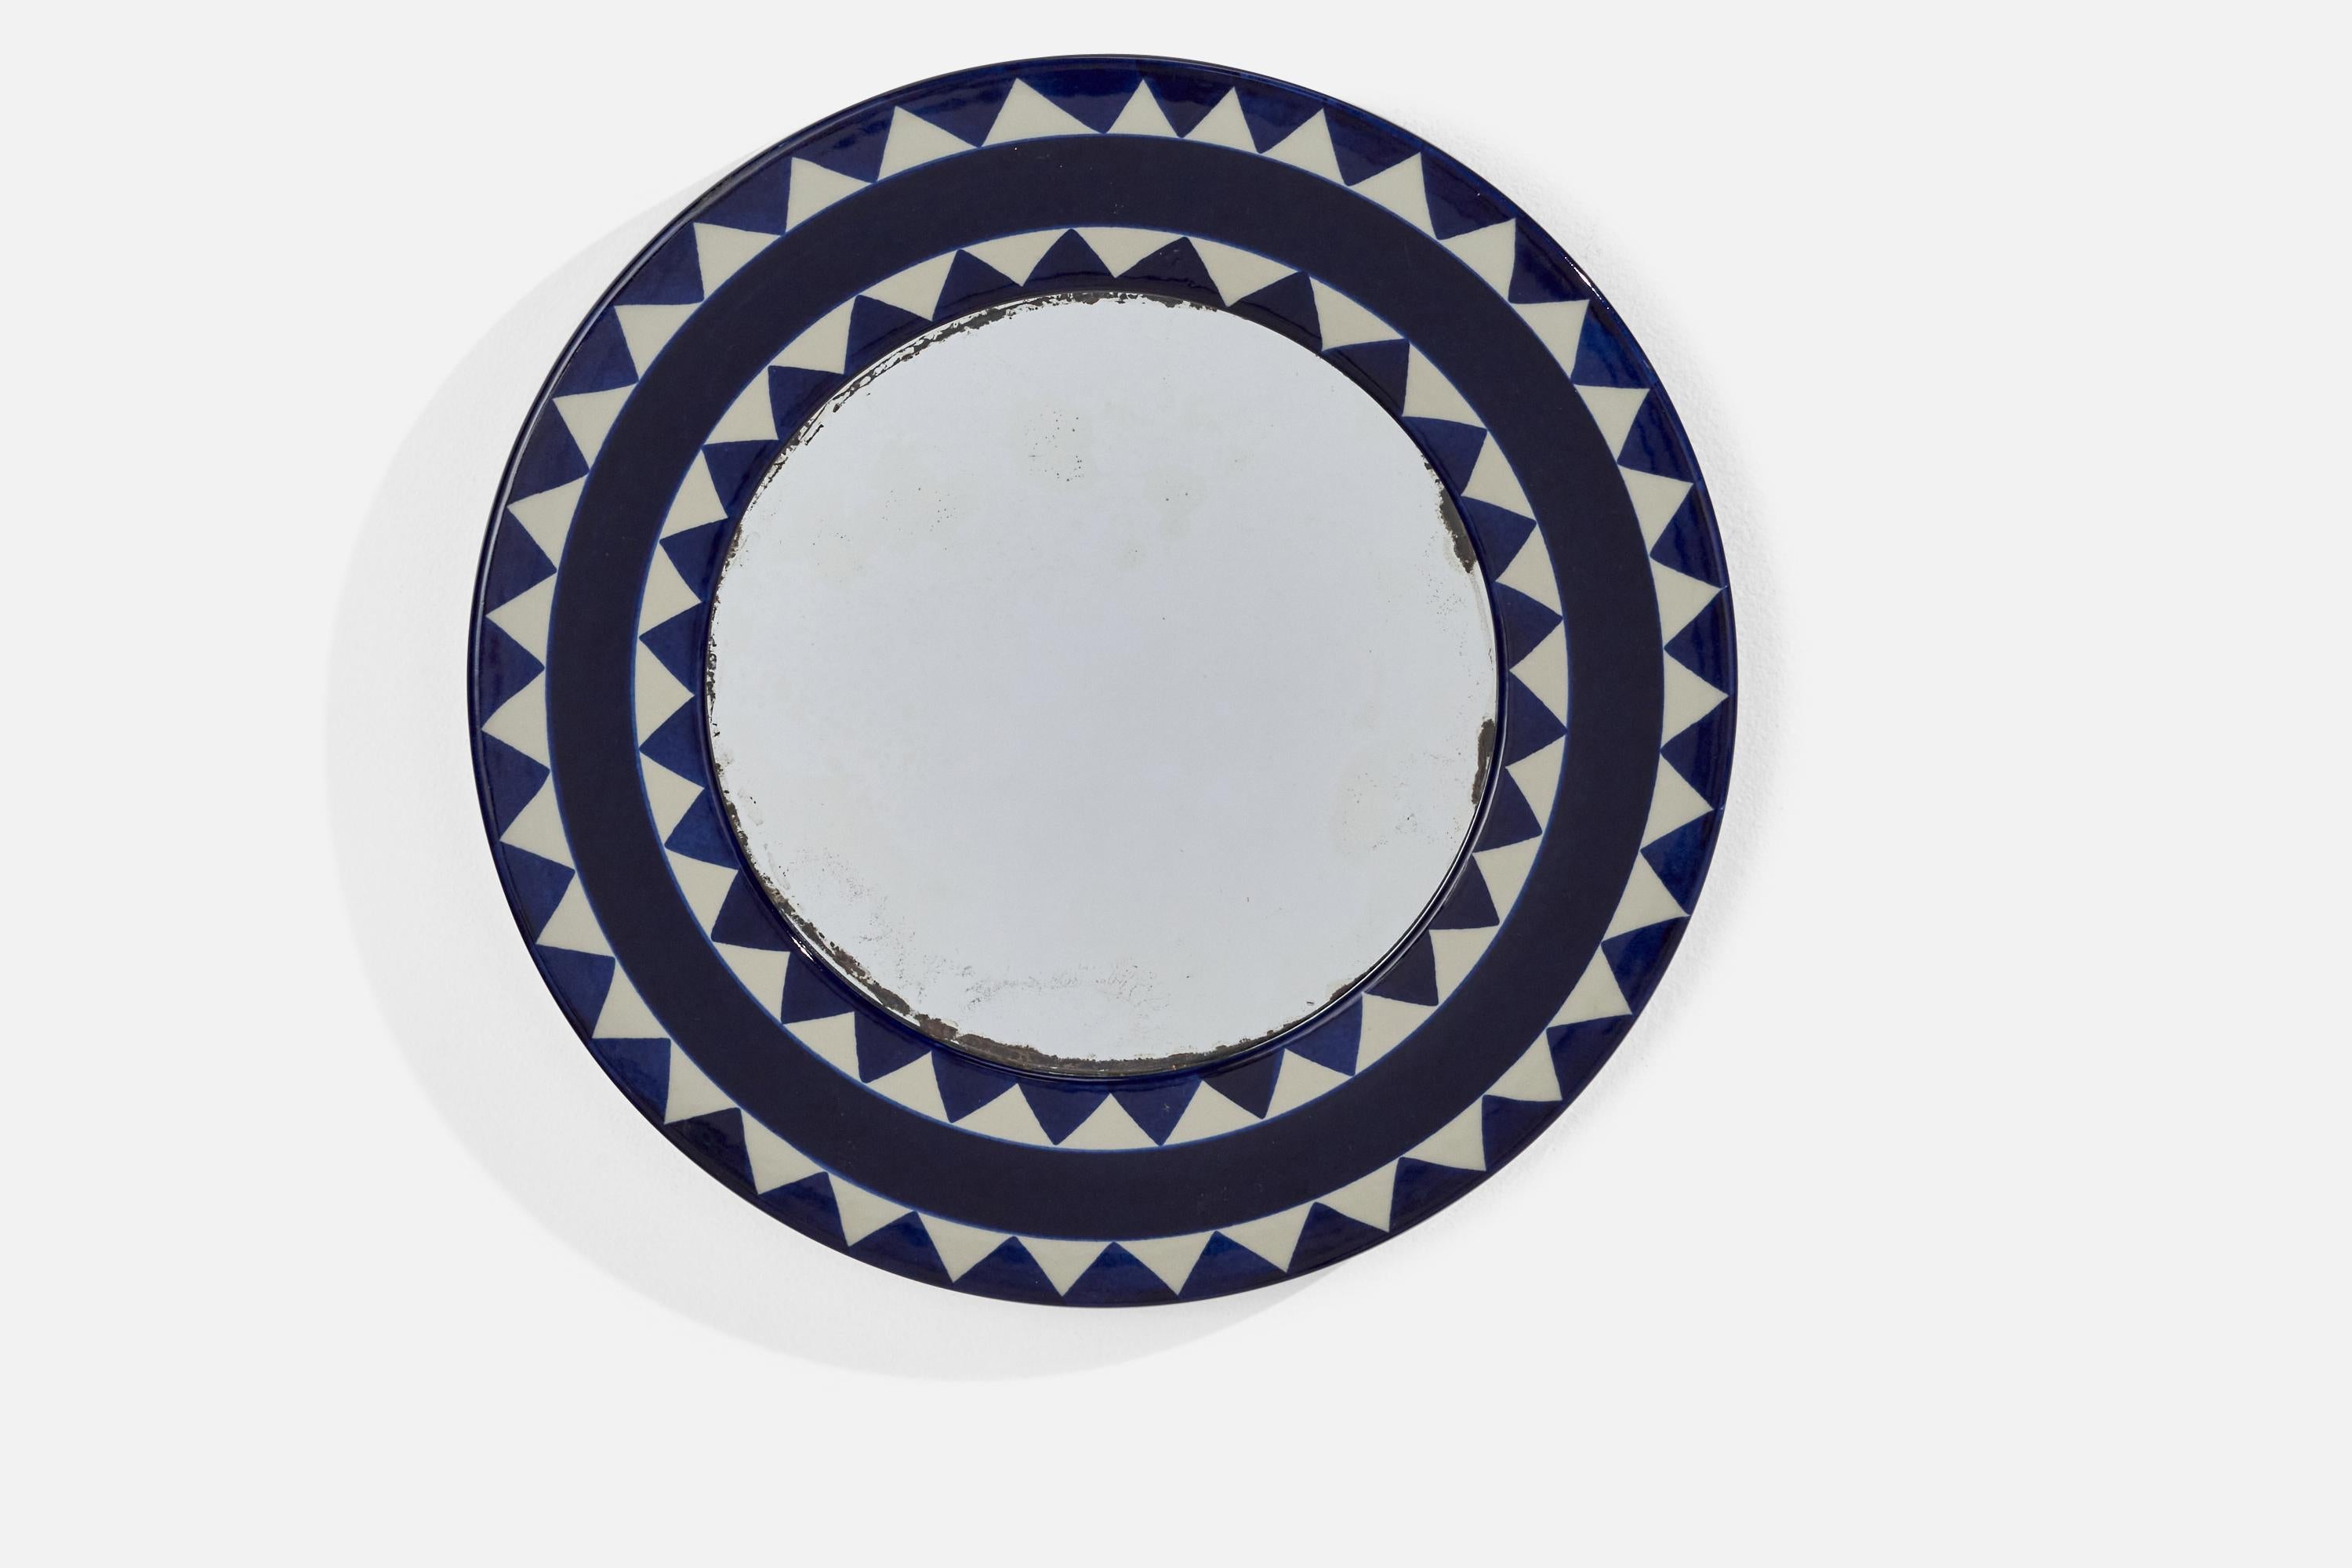 A blue and grey-painted stoneware mirror designed by Marianne Westman and produced by Rörstrand, Sweden, 1960s.